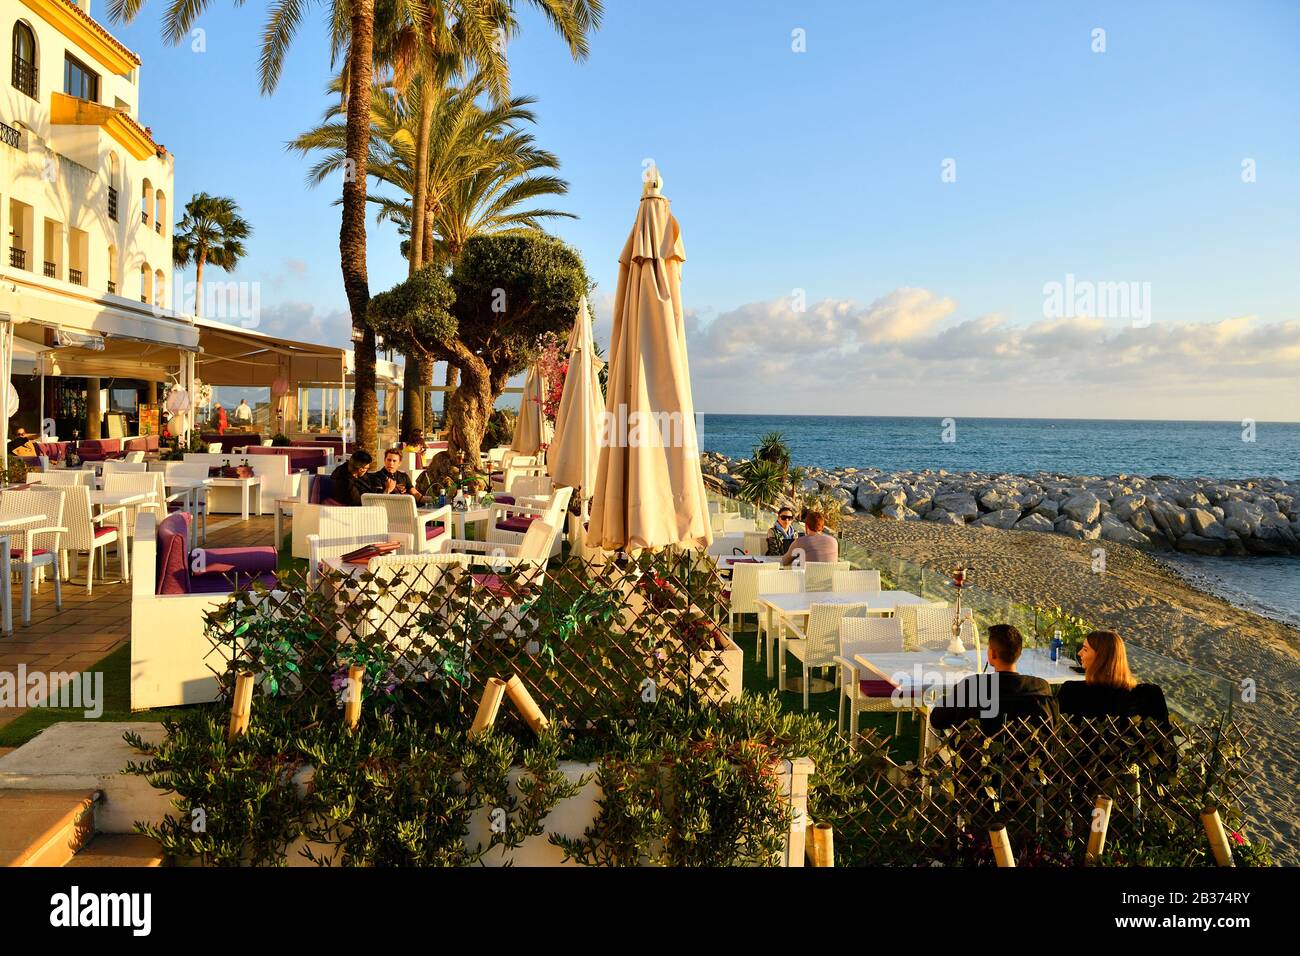 Beach Restaurant In Puerto Banus Stock Photo, Picture and Royalty Free  Image. Image 58169581.